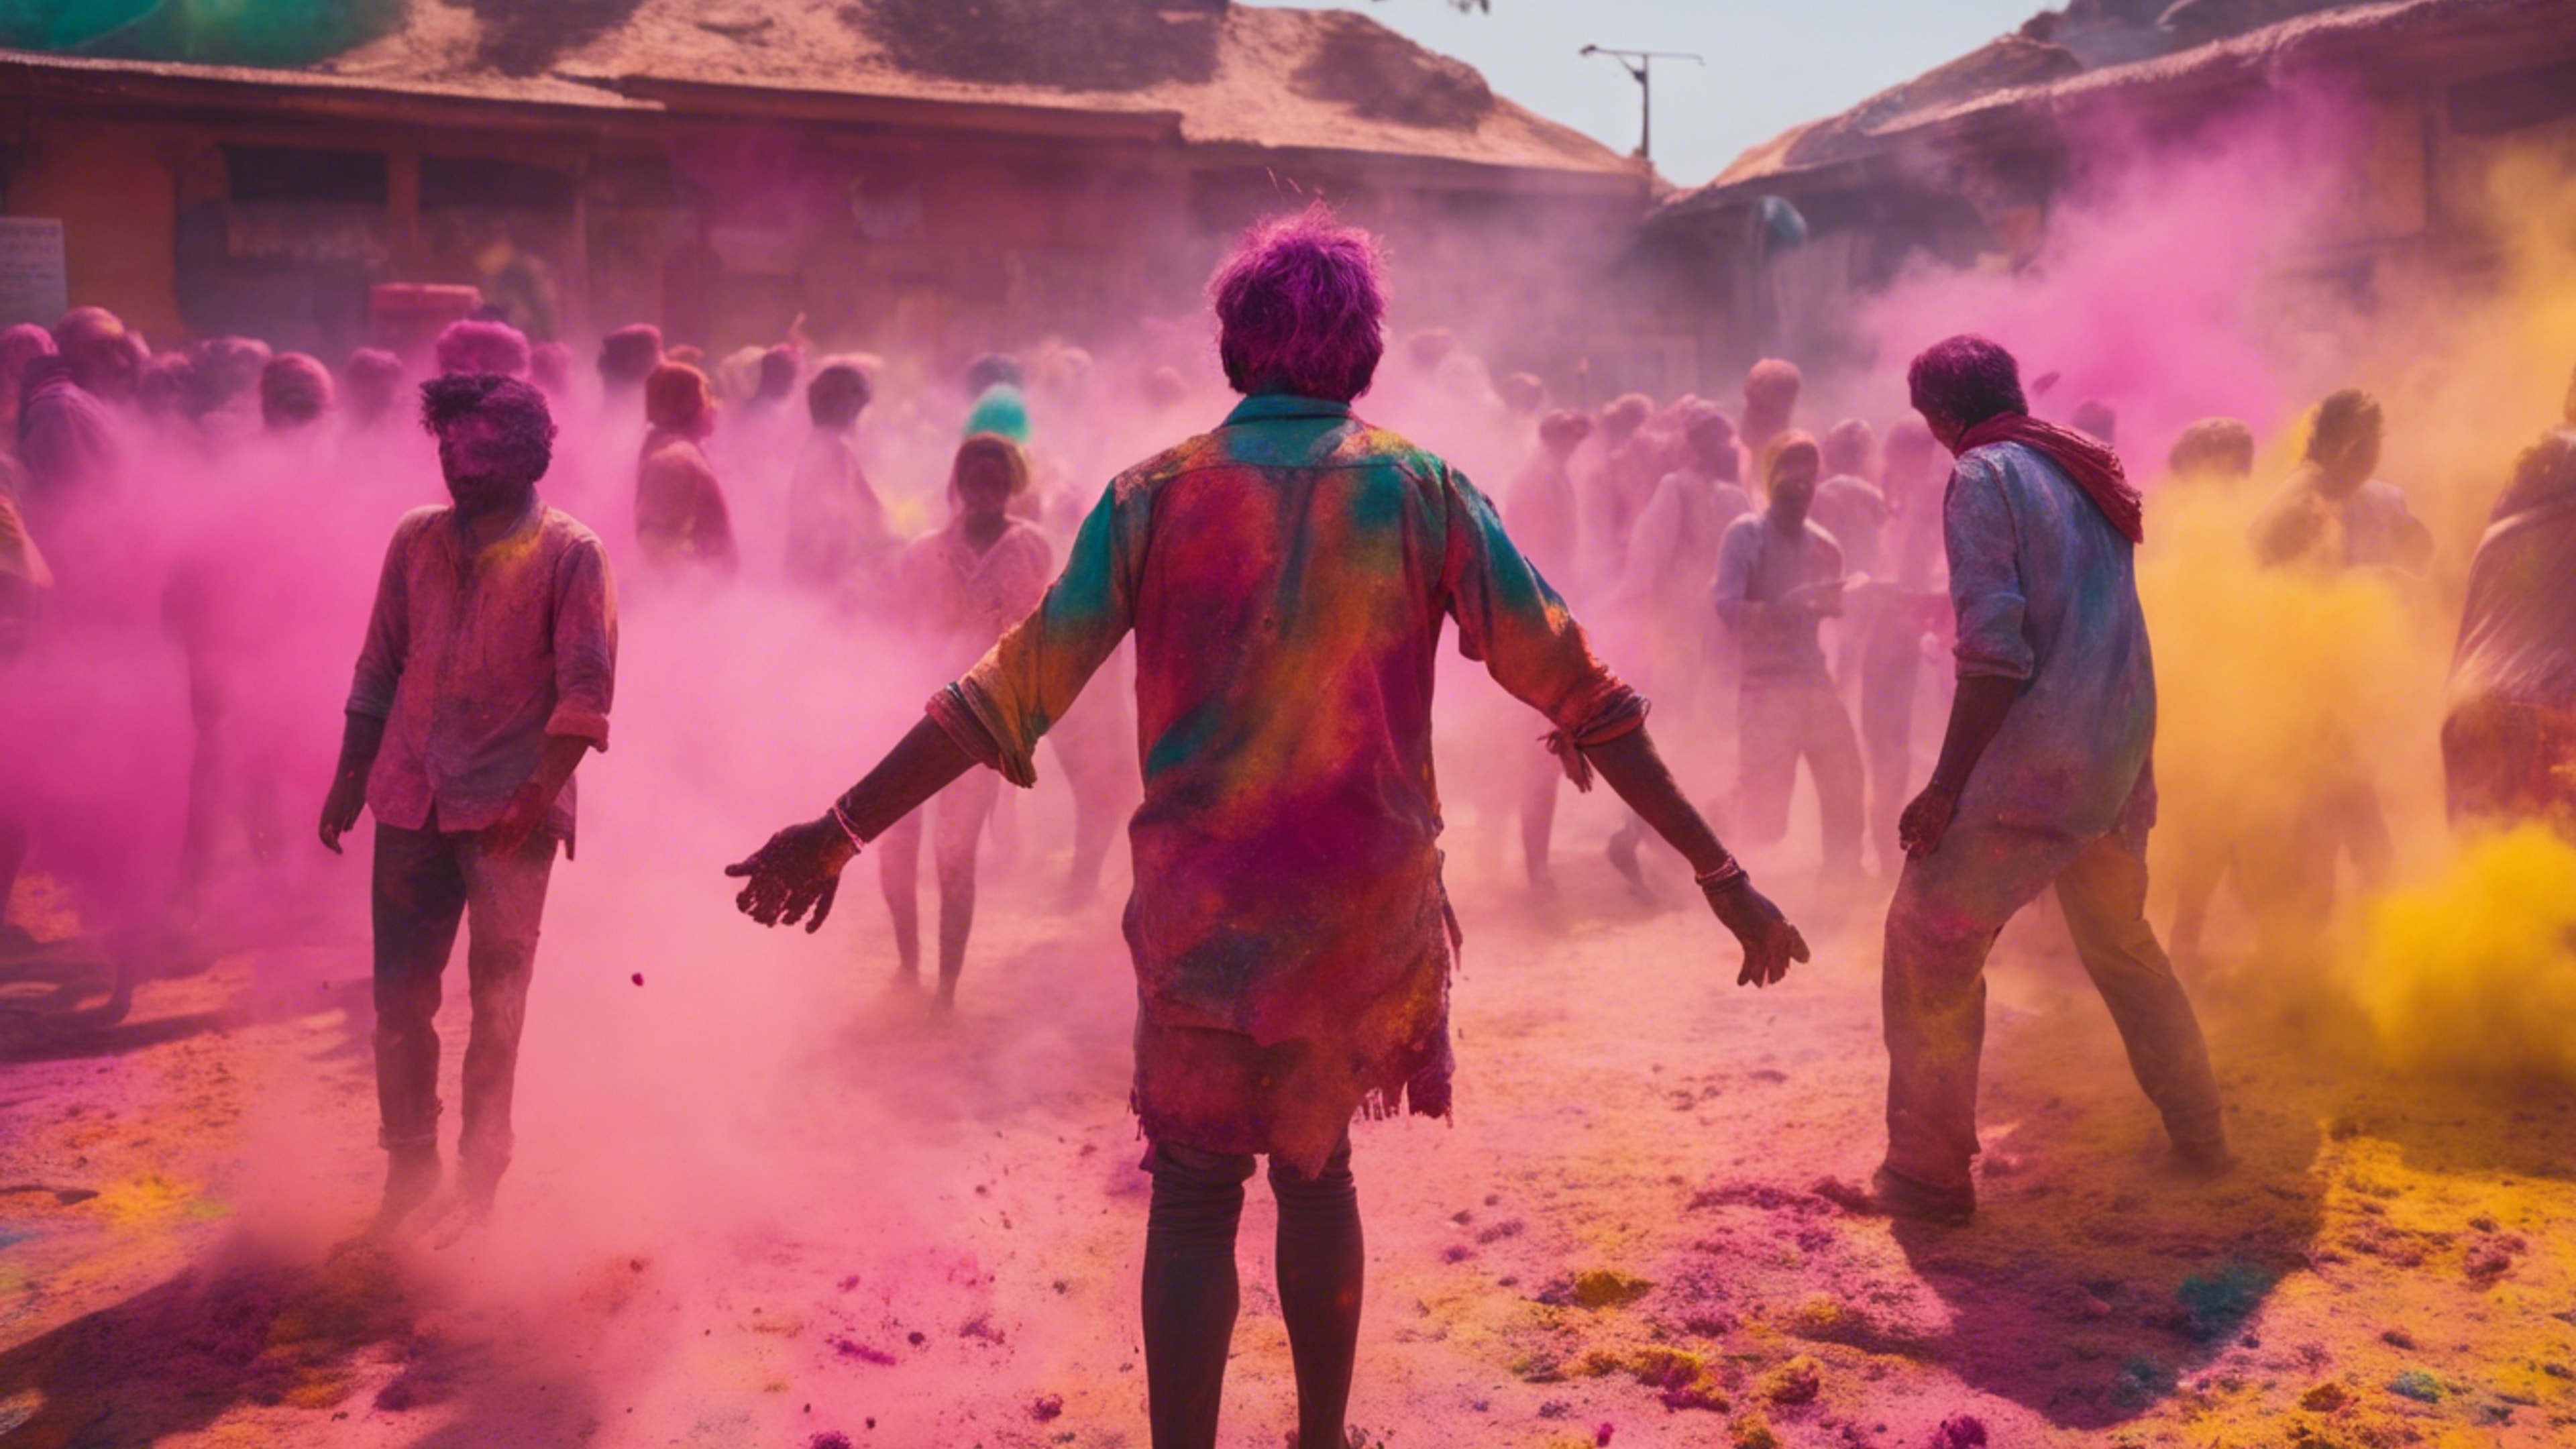 A vibrant and colorful Holi festival with people throwing powdered colors and laughing in the backdrop of an old Indian city. Шпалери[6dae05cbdf264a67bd16]